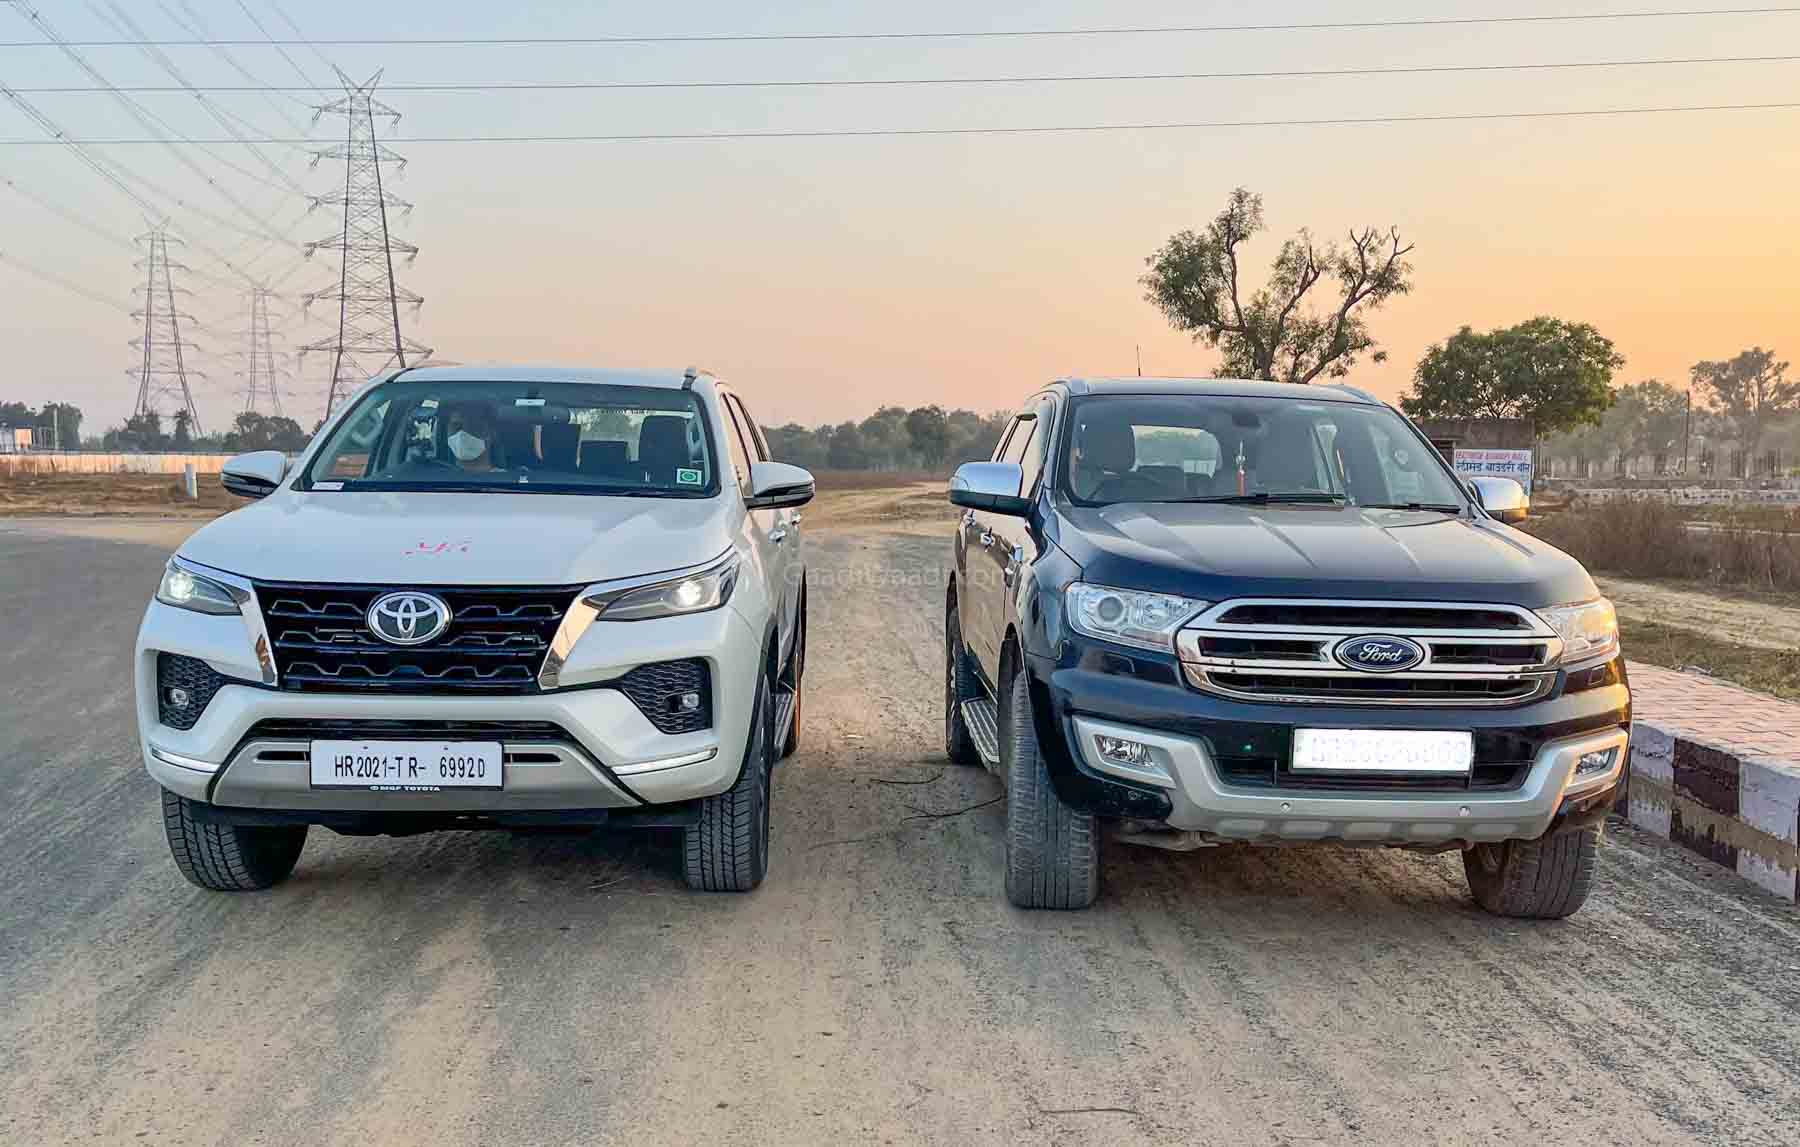 Toyota Fortuner rival jeep meridian discontinues its base model